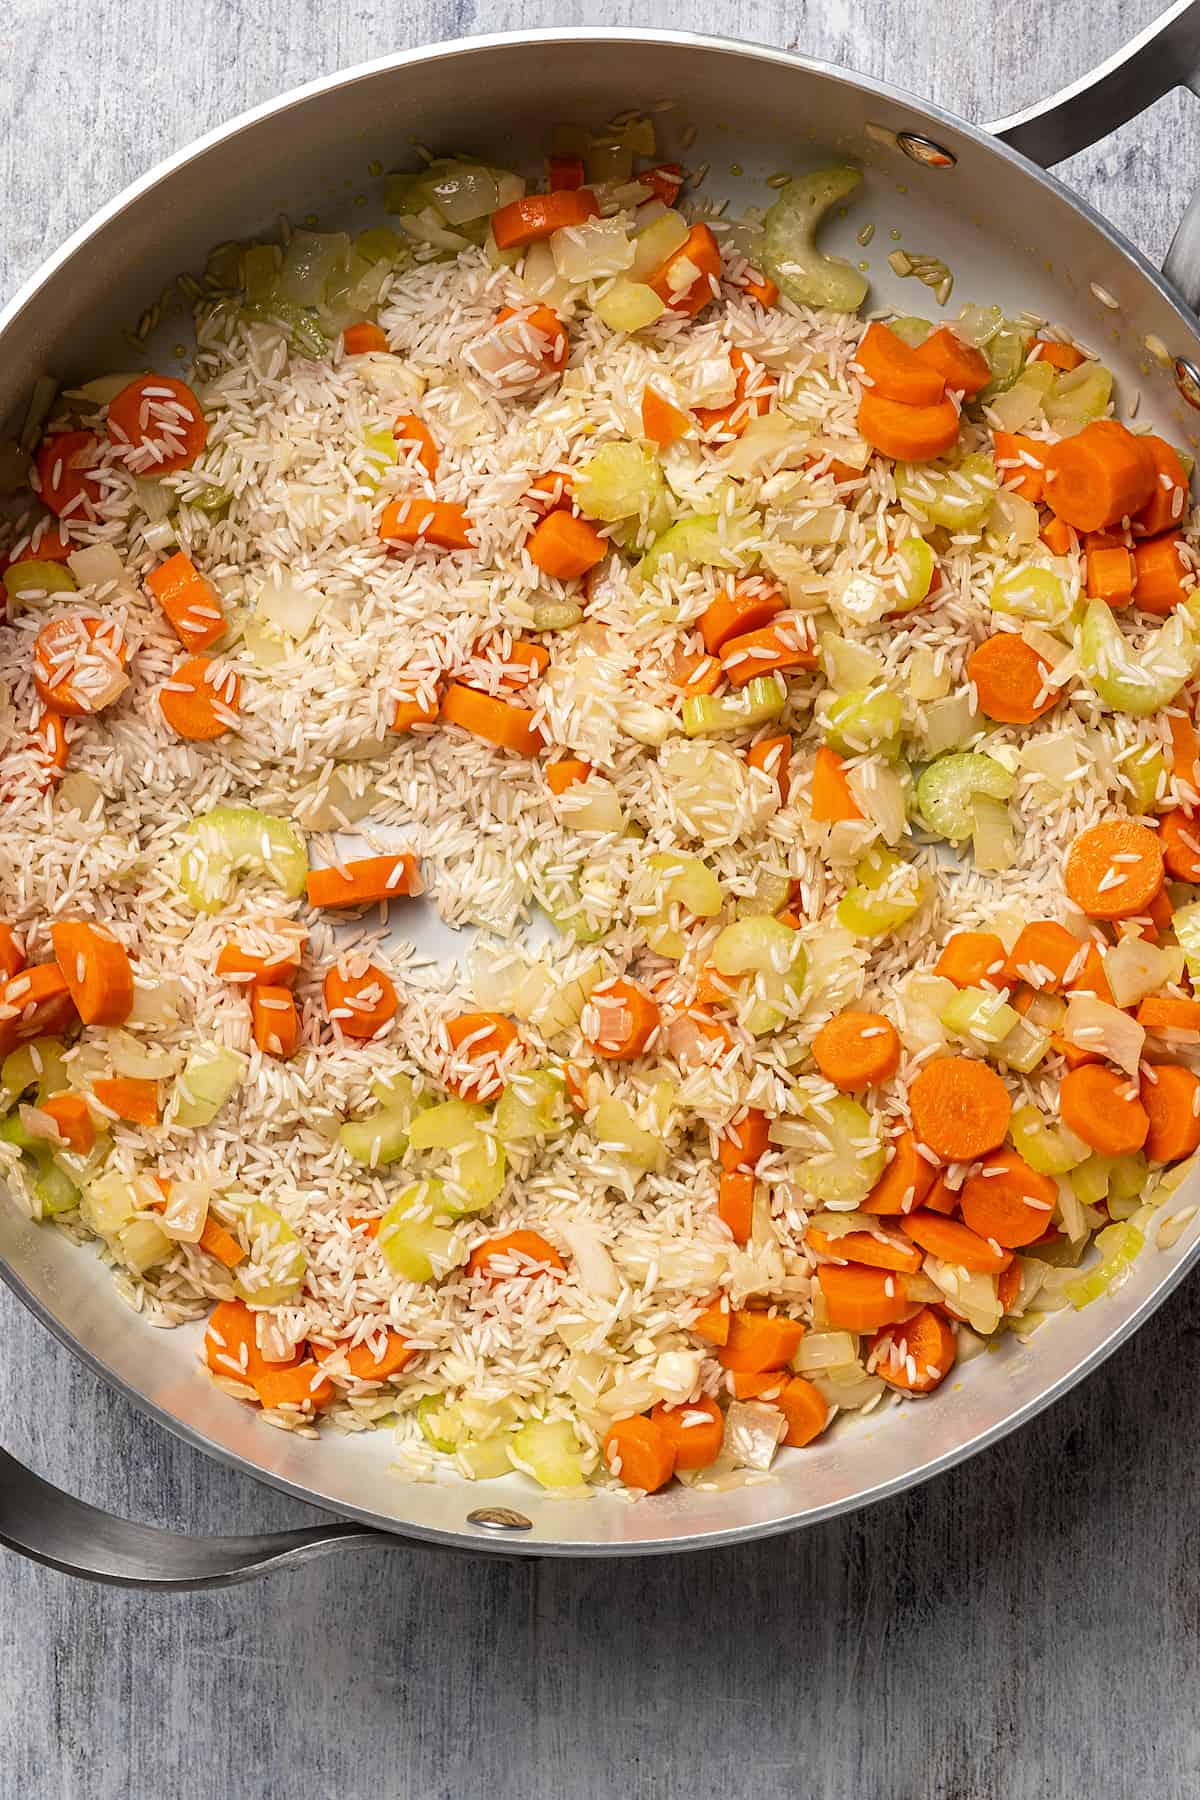 Toasting rice in a skillet of sauteed vegetables.